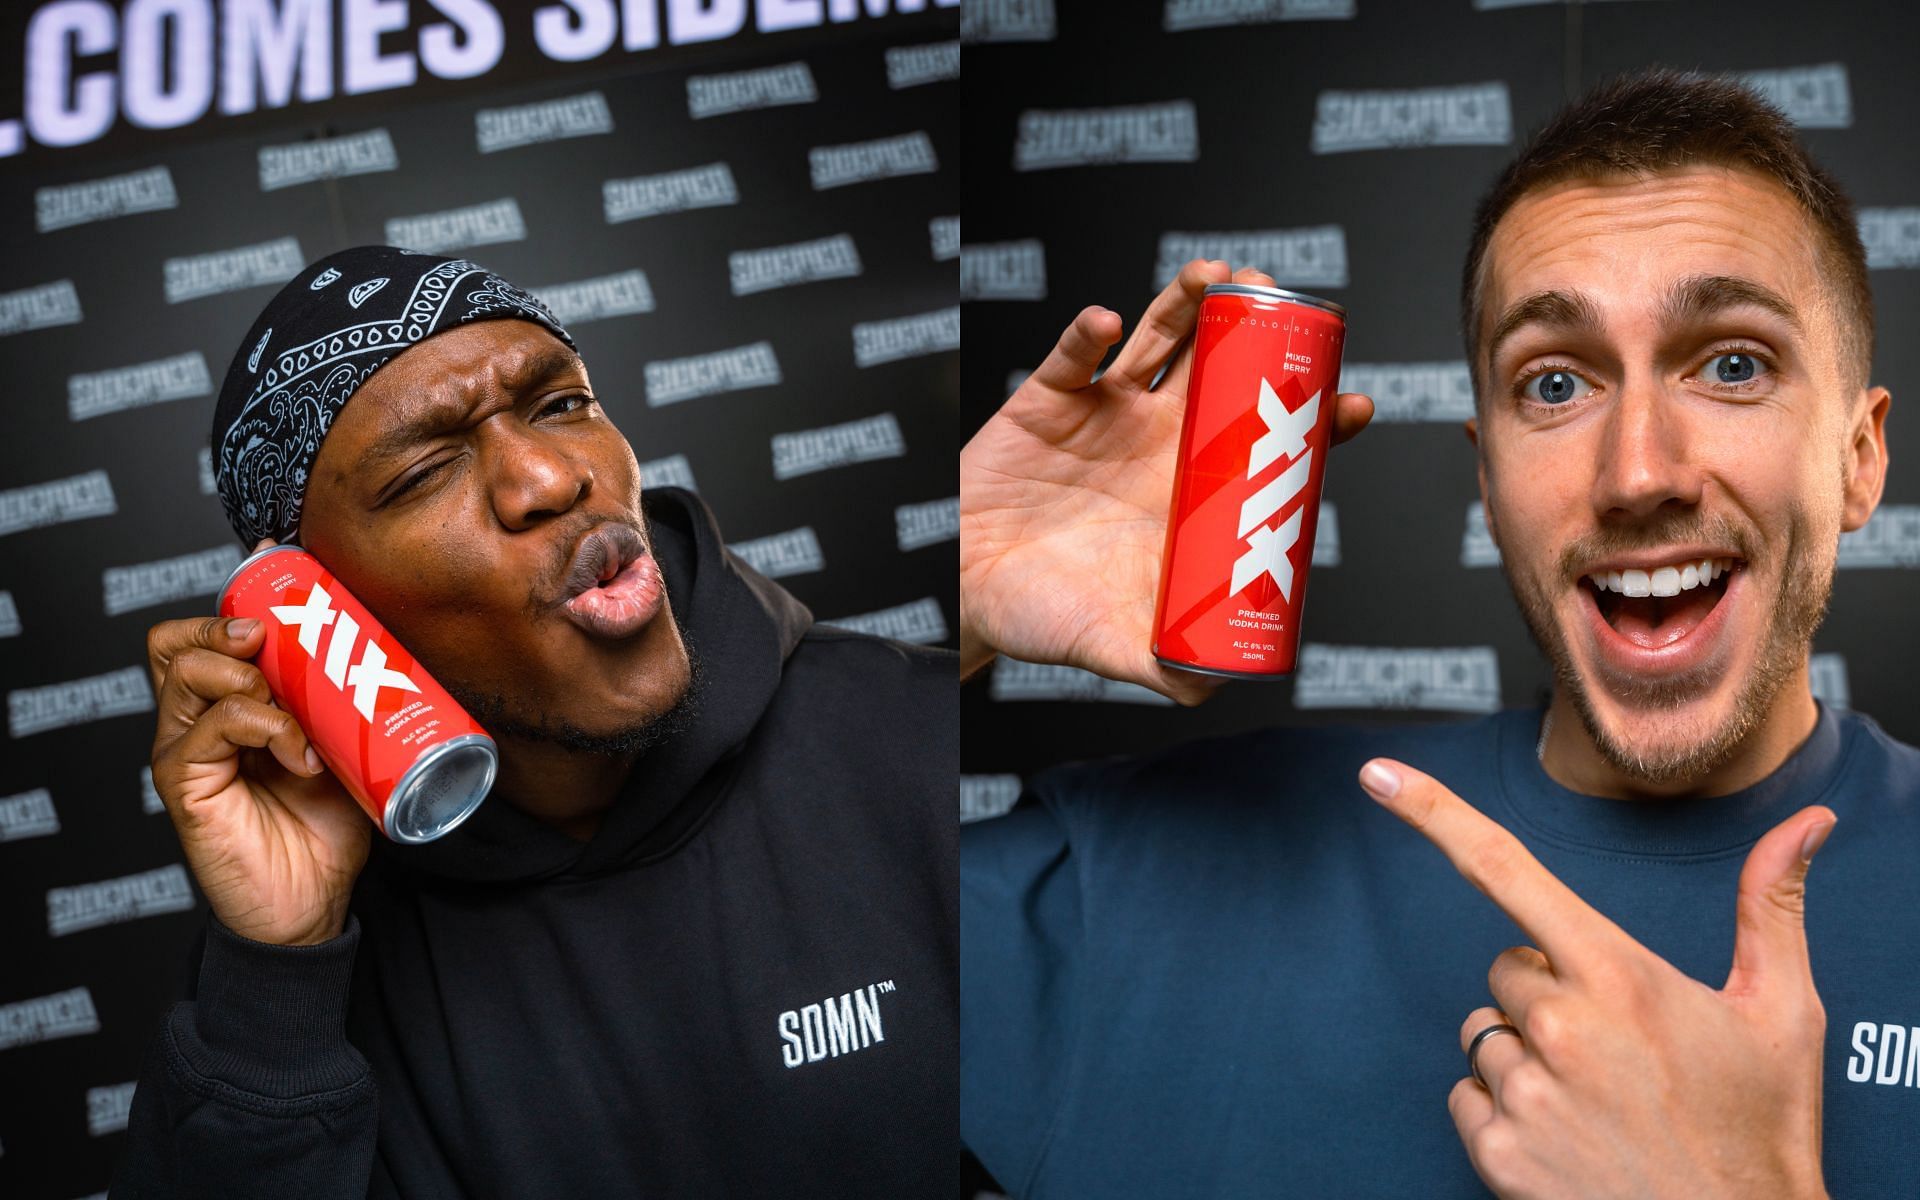 The Sidemen commemorate 10-year anniversary by launching XIX Vodka at ...